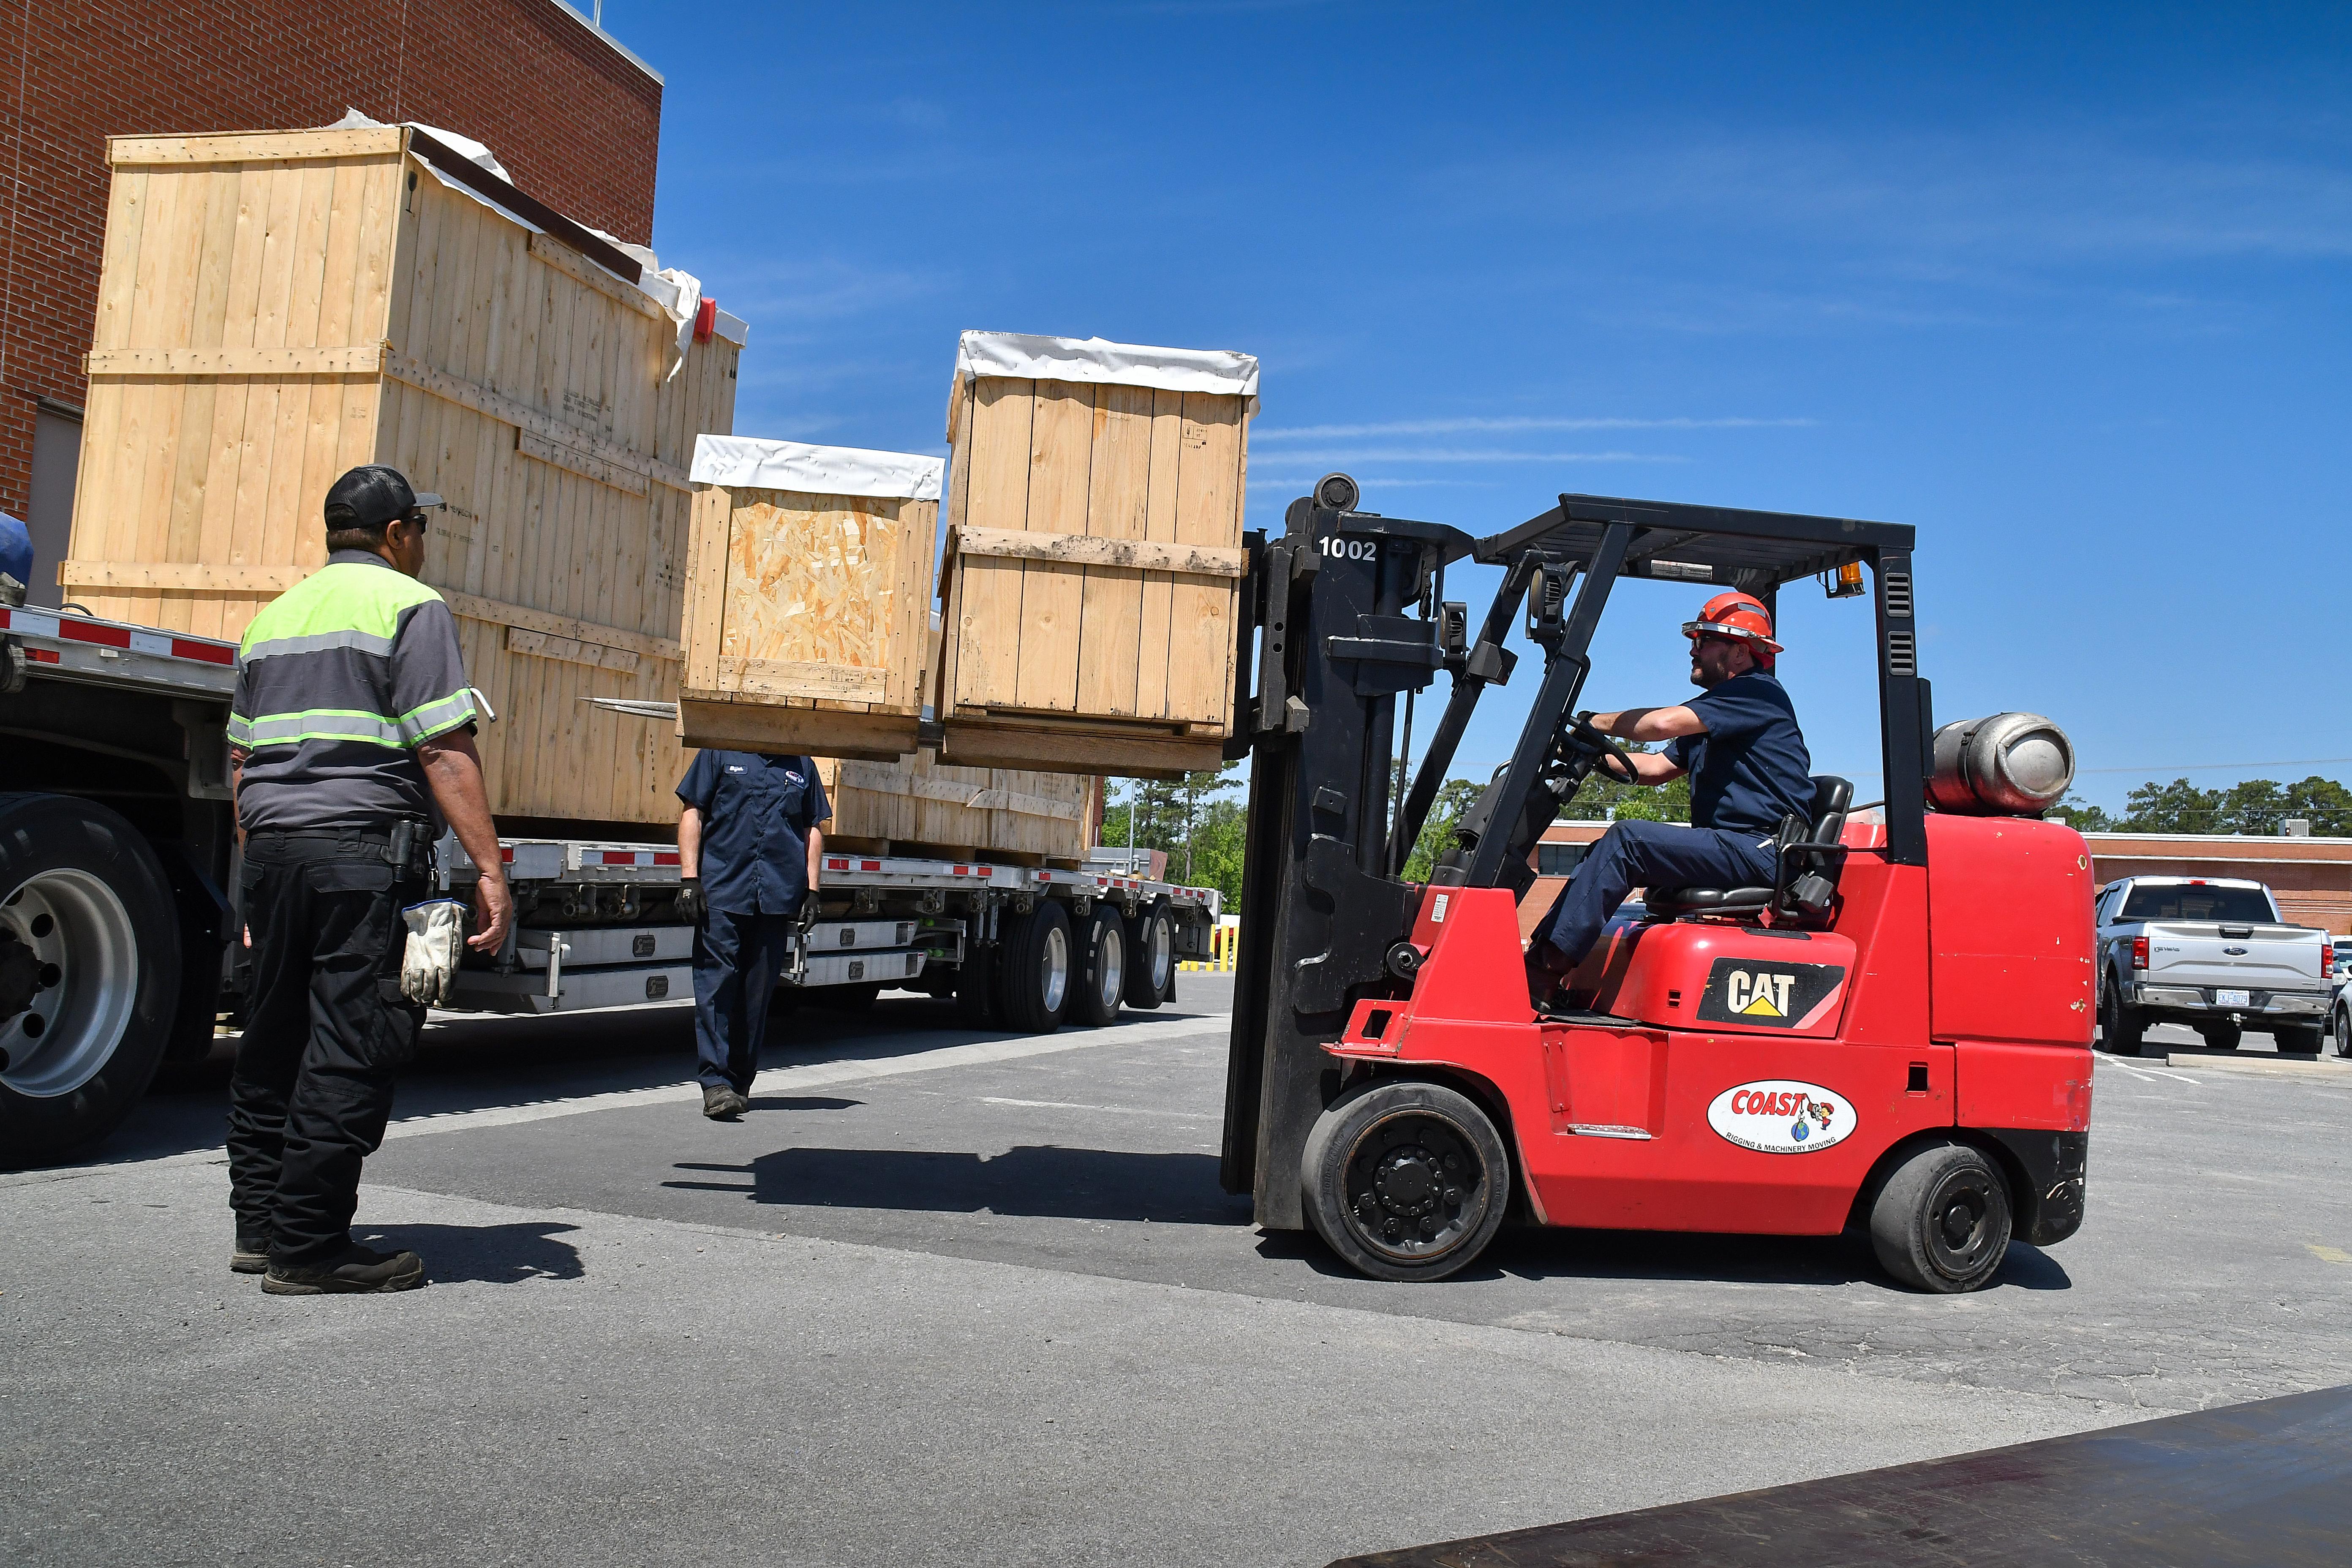 Rigging technicians unload a coordinate measuring machine (CMM) from a tractor trailer at Fleet Readiness Center East (FRCE). A CMM is a device that measures the geometry of physical objects by sensing points on the surface of the object with a probe. This machine is one of two new CMMs FRCE acquired capable of large-volume measurement. Depot officials say these additional machines will improve efficiency and reduce wait times caused by maintenance and equipment calibration.